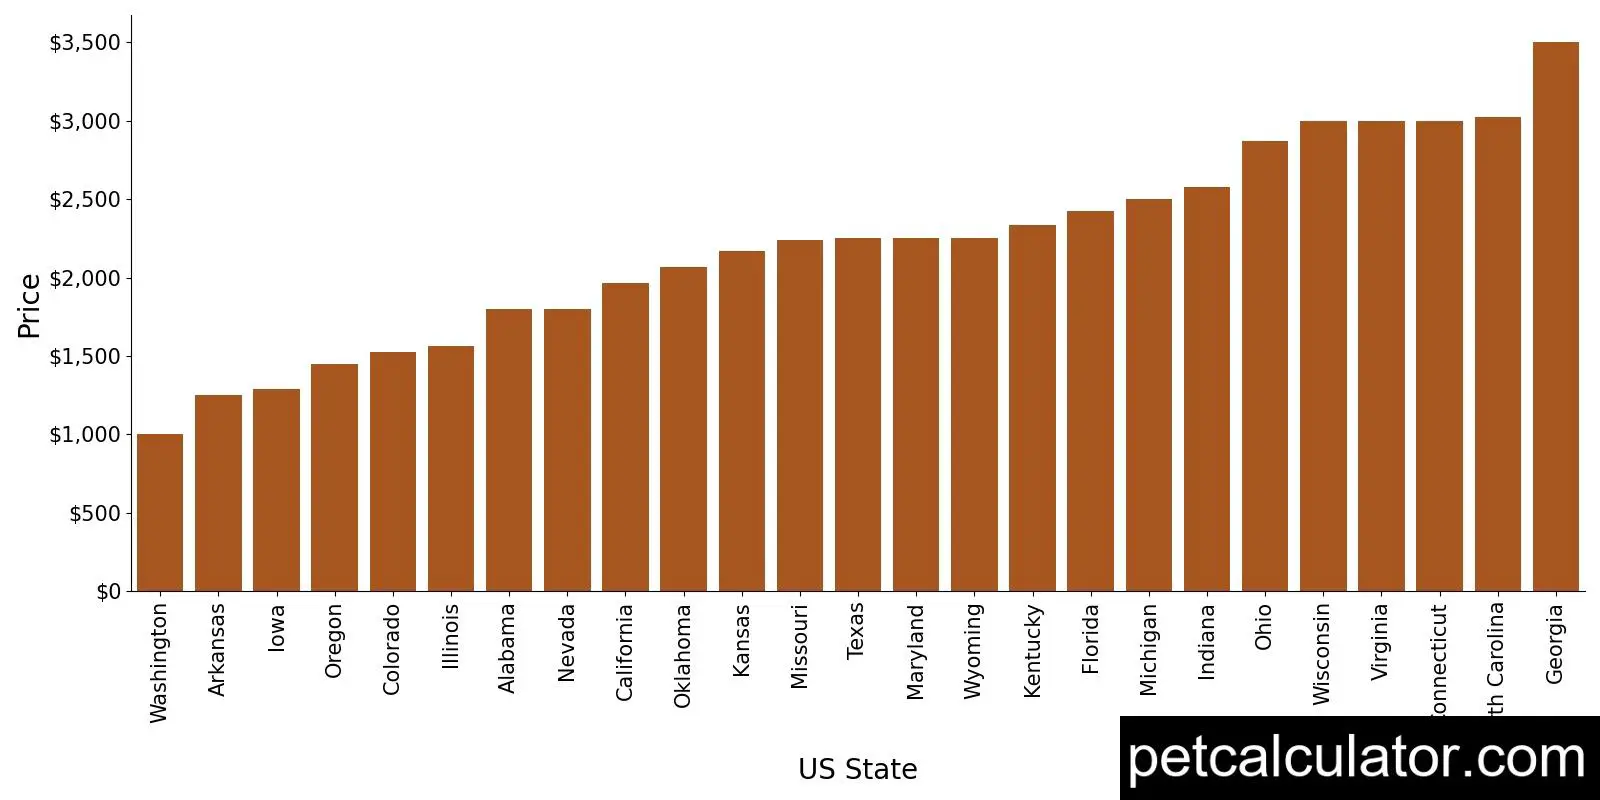 Price of Dogue de Bordeaux by US State 